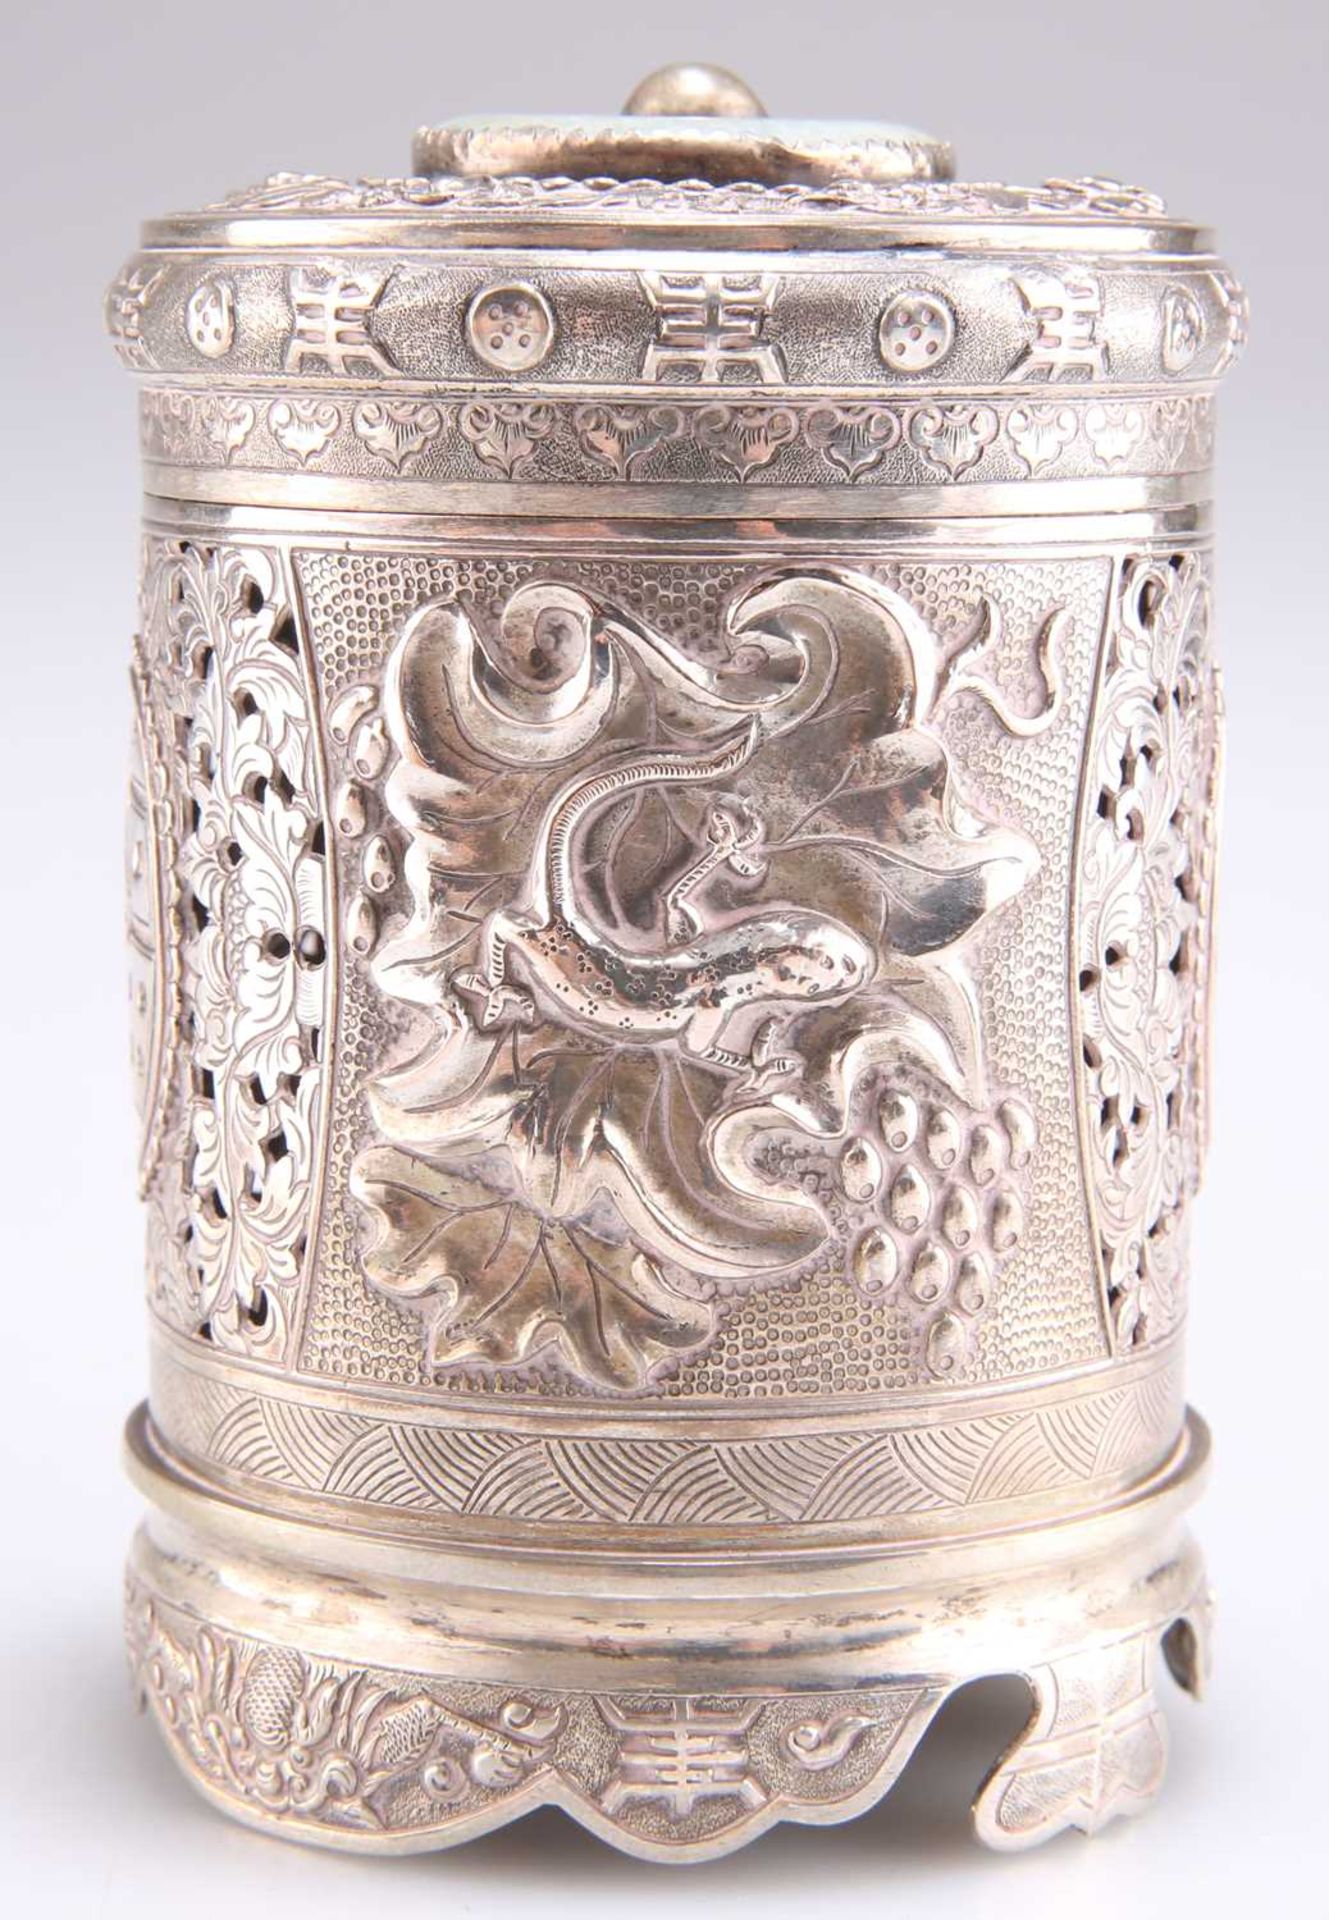 A VIETNAMESE JADE-MOUNTED SILVER CADDY - Image 2 of 6